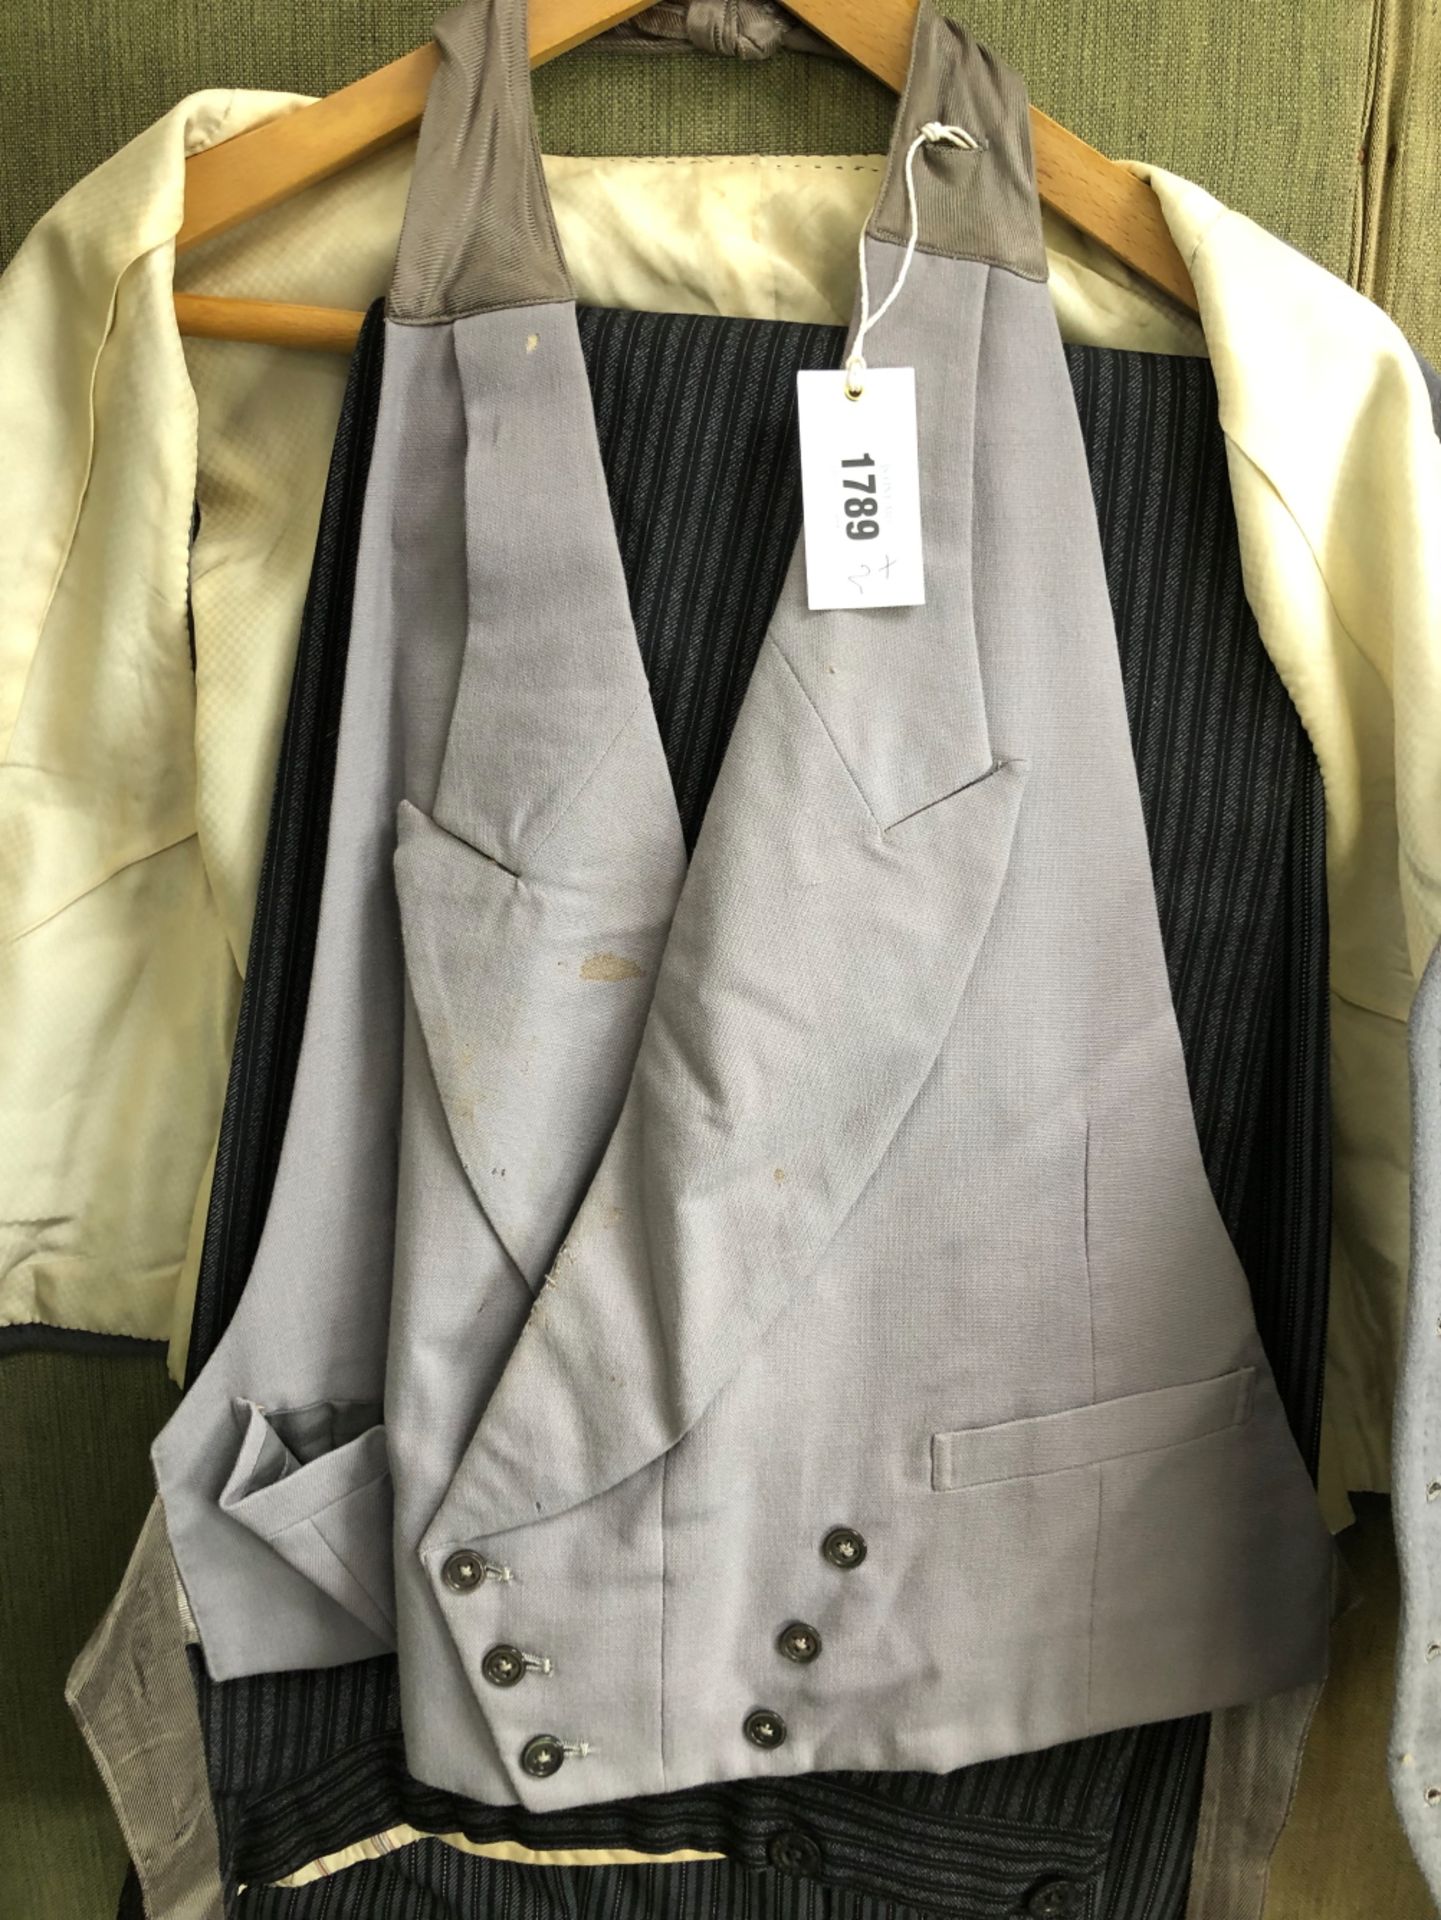 MORNING DRESS: A GREY WAISTCOAT, A GREY DICKIE AND STRIPED TROUSERS, WAIST 38 TOGETHER WITH - Image 9 of 16